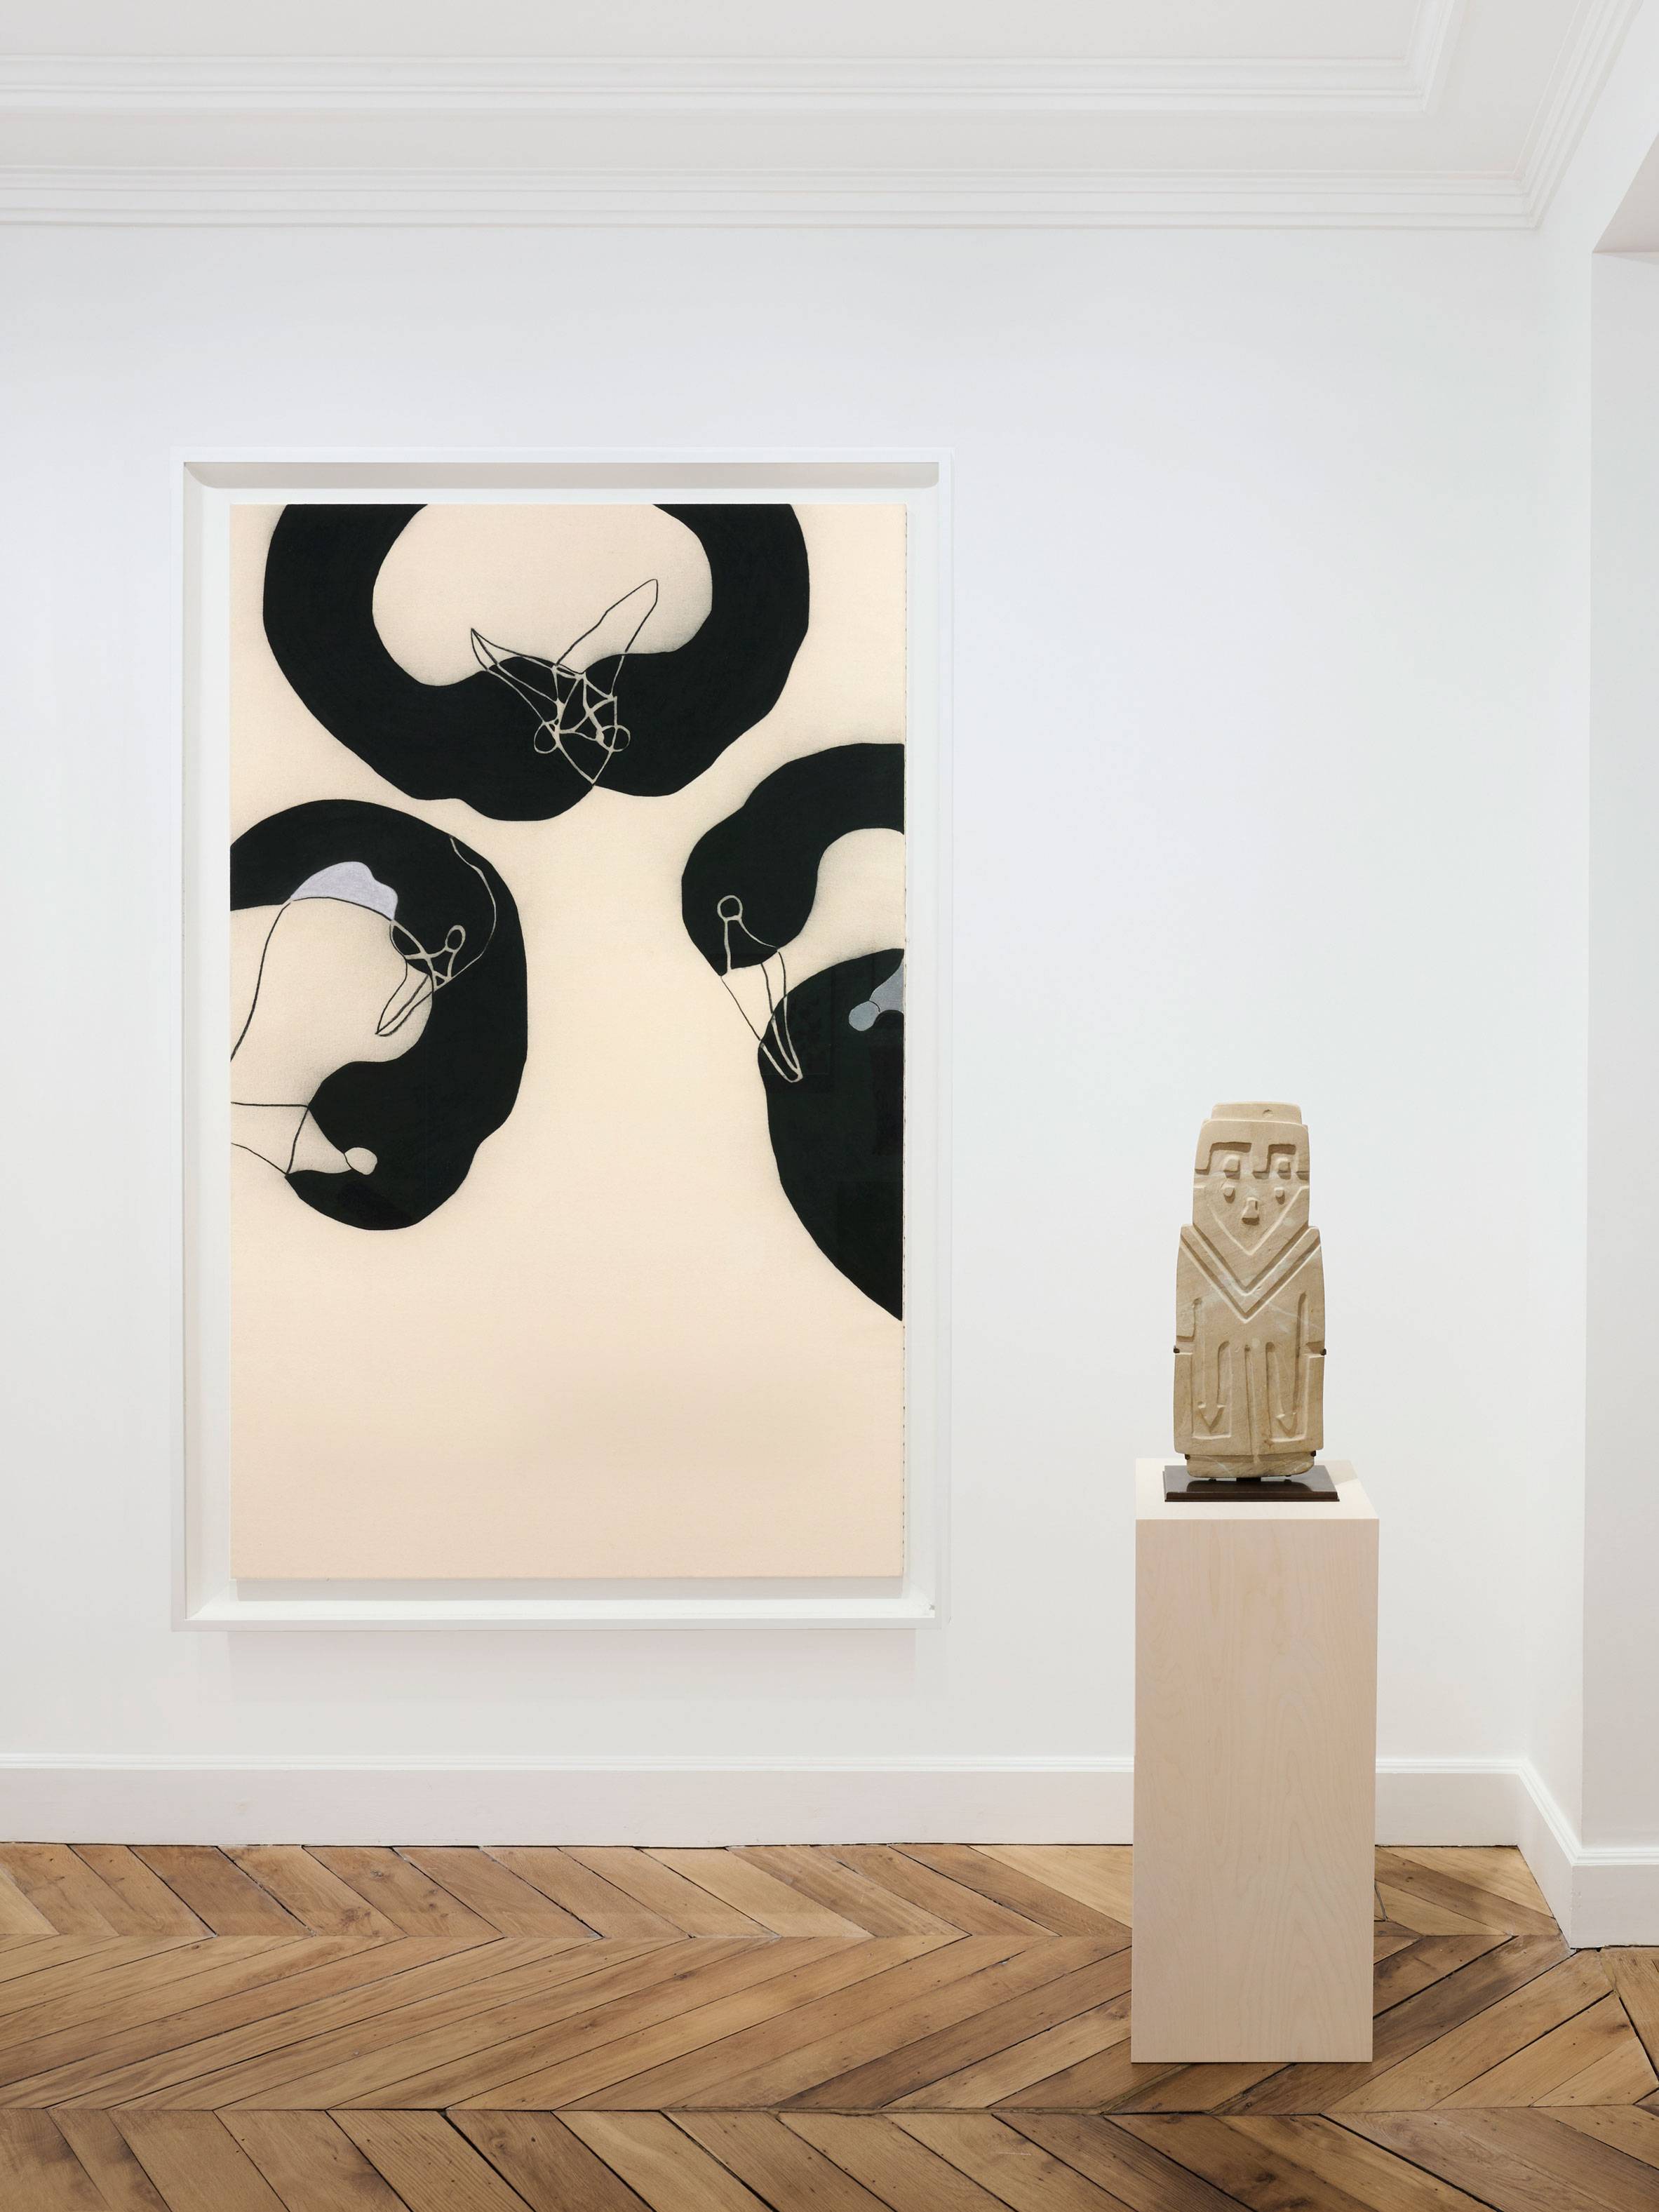 À gauche : Gary Hume, Swans IV (Drawing), 2021. Charcoal and pastel on canvas, in artist's frame. 195 x 128 x 7,6 cm © Gary Hume. All Rights Reserved, DACS 2023. 
À droite : Valdivia Culture, Owl Effigy, Ca. 2500BC. Stone. 58 x 23 x 10,8 cm © Paul Hughes Fine Art/Photo : White Cube (Fabrice Gousset)
